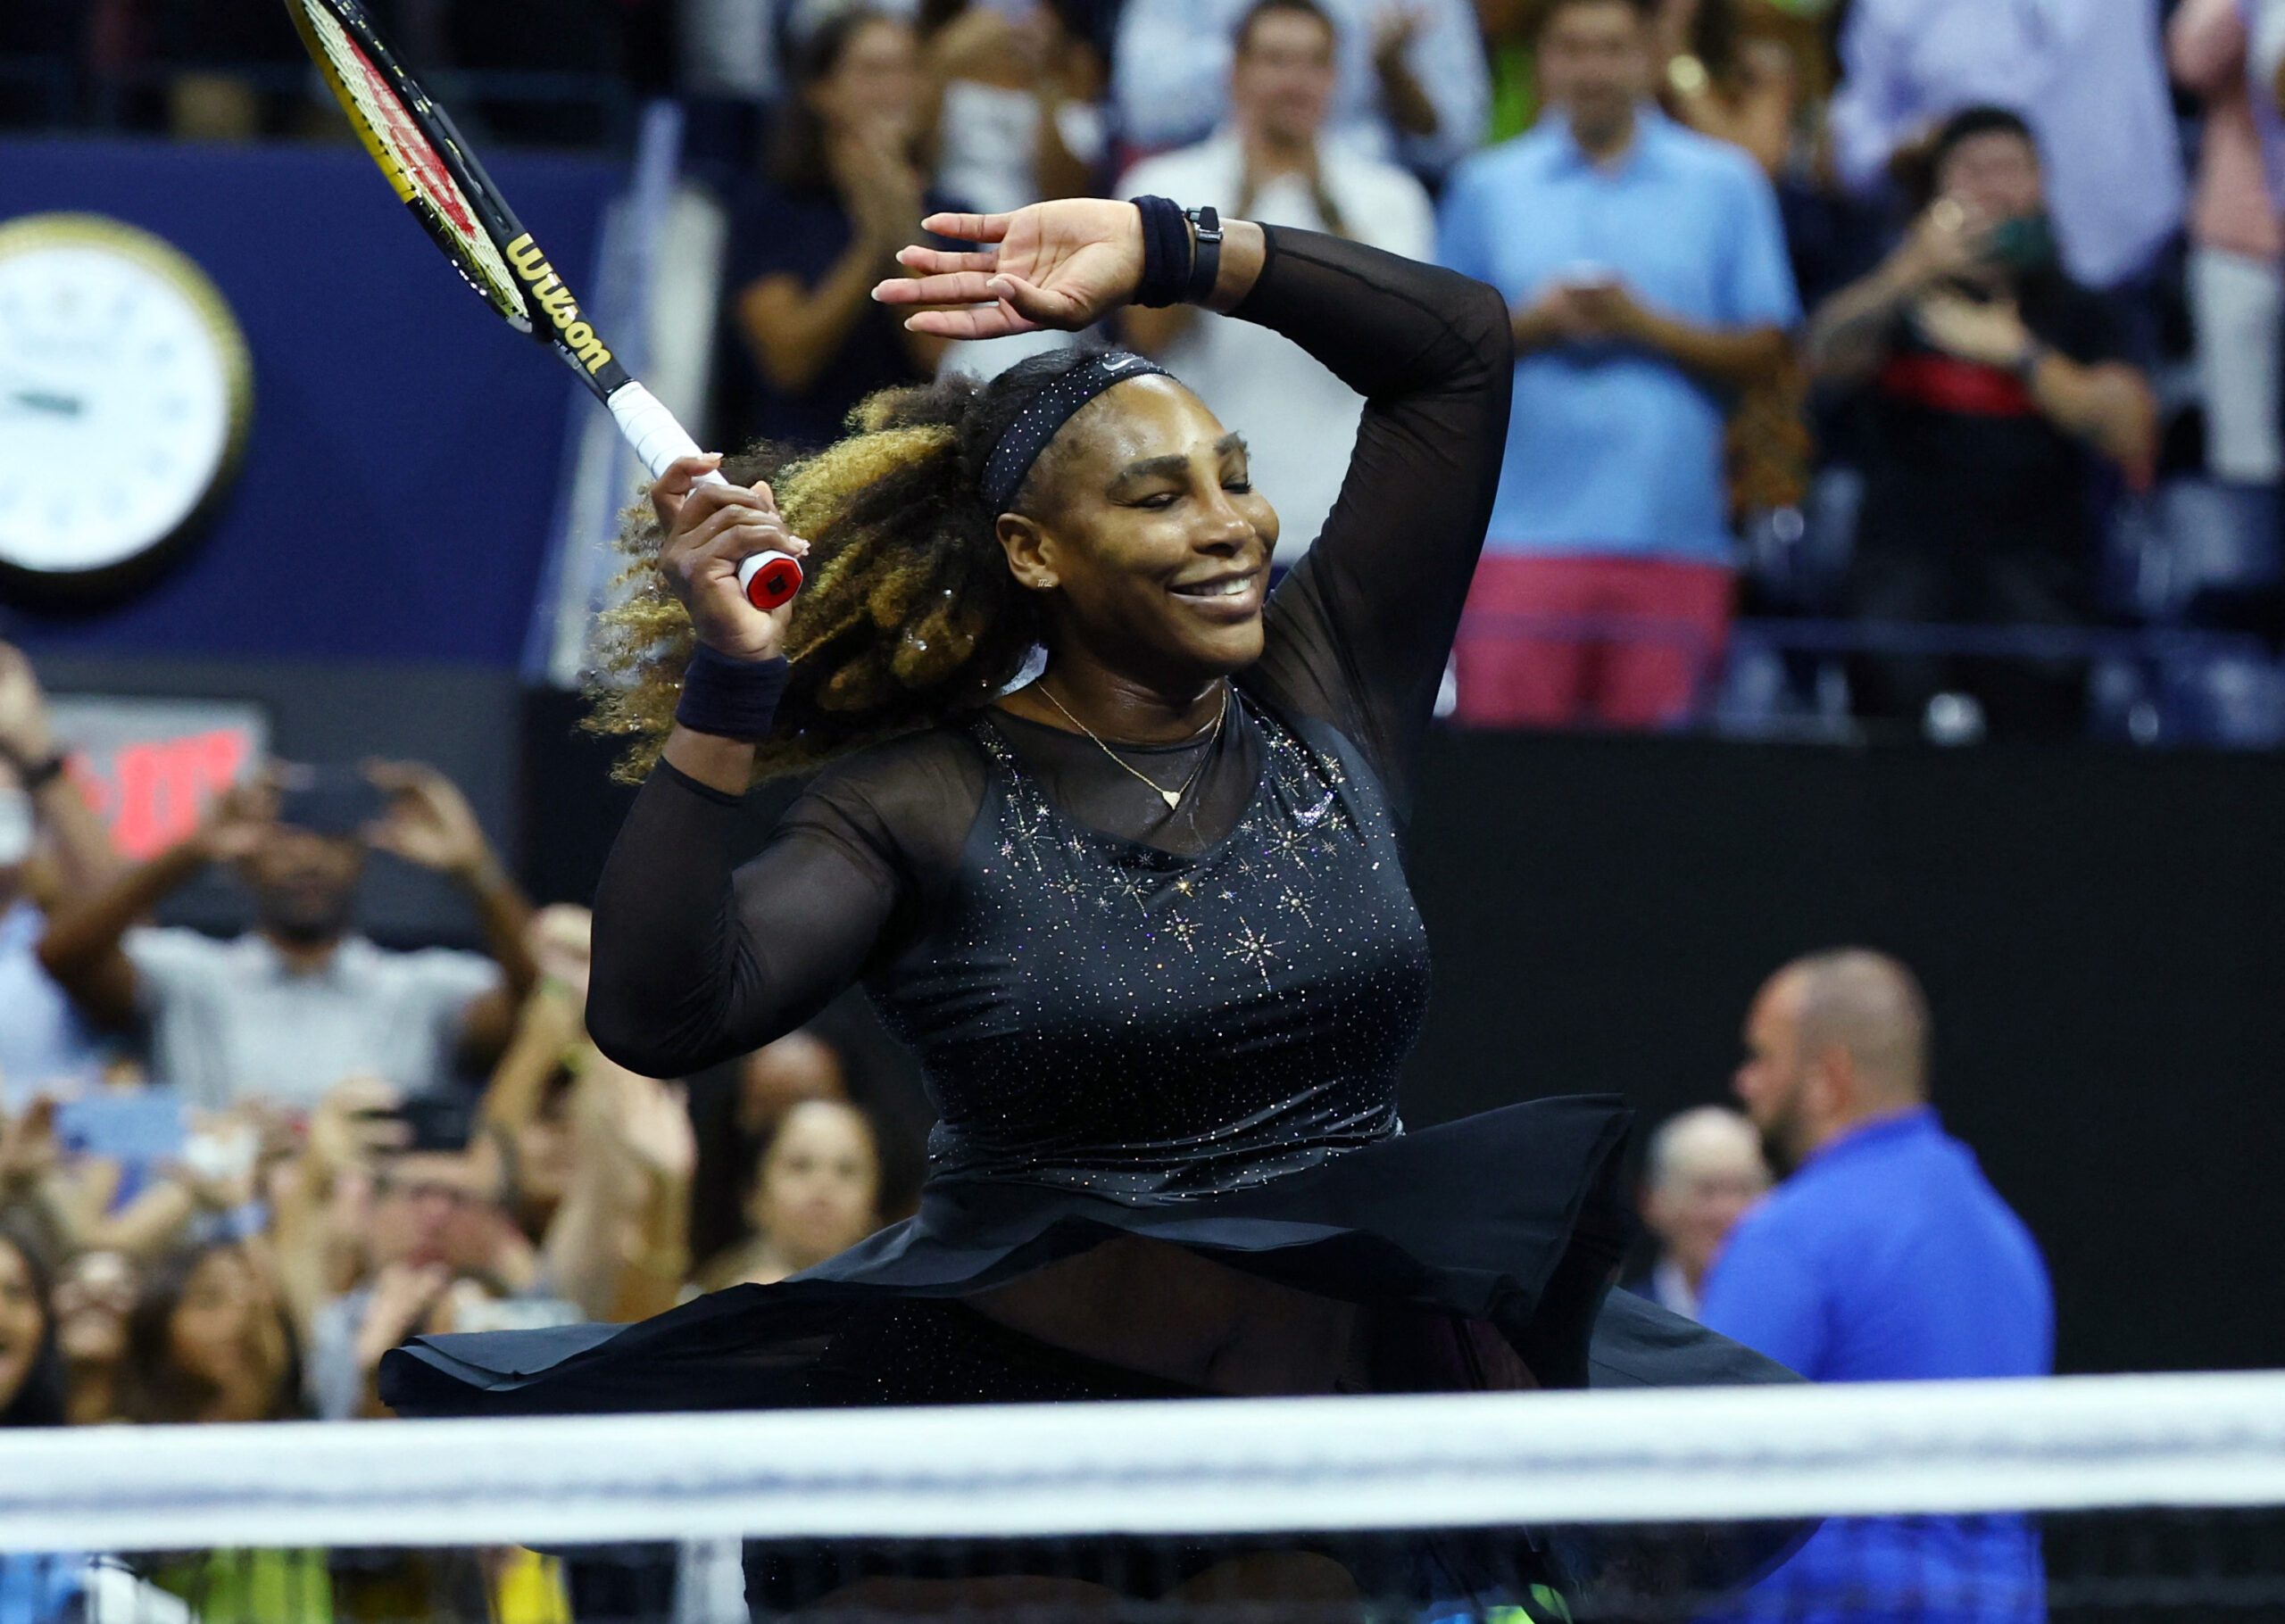 Serena retirement on hold after win over world No. 2